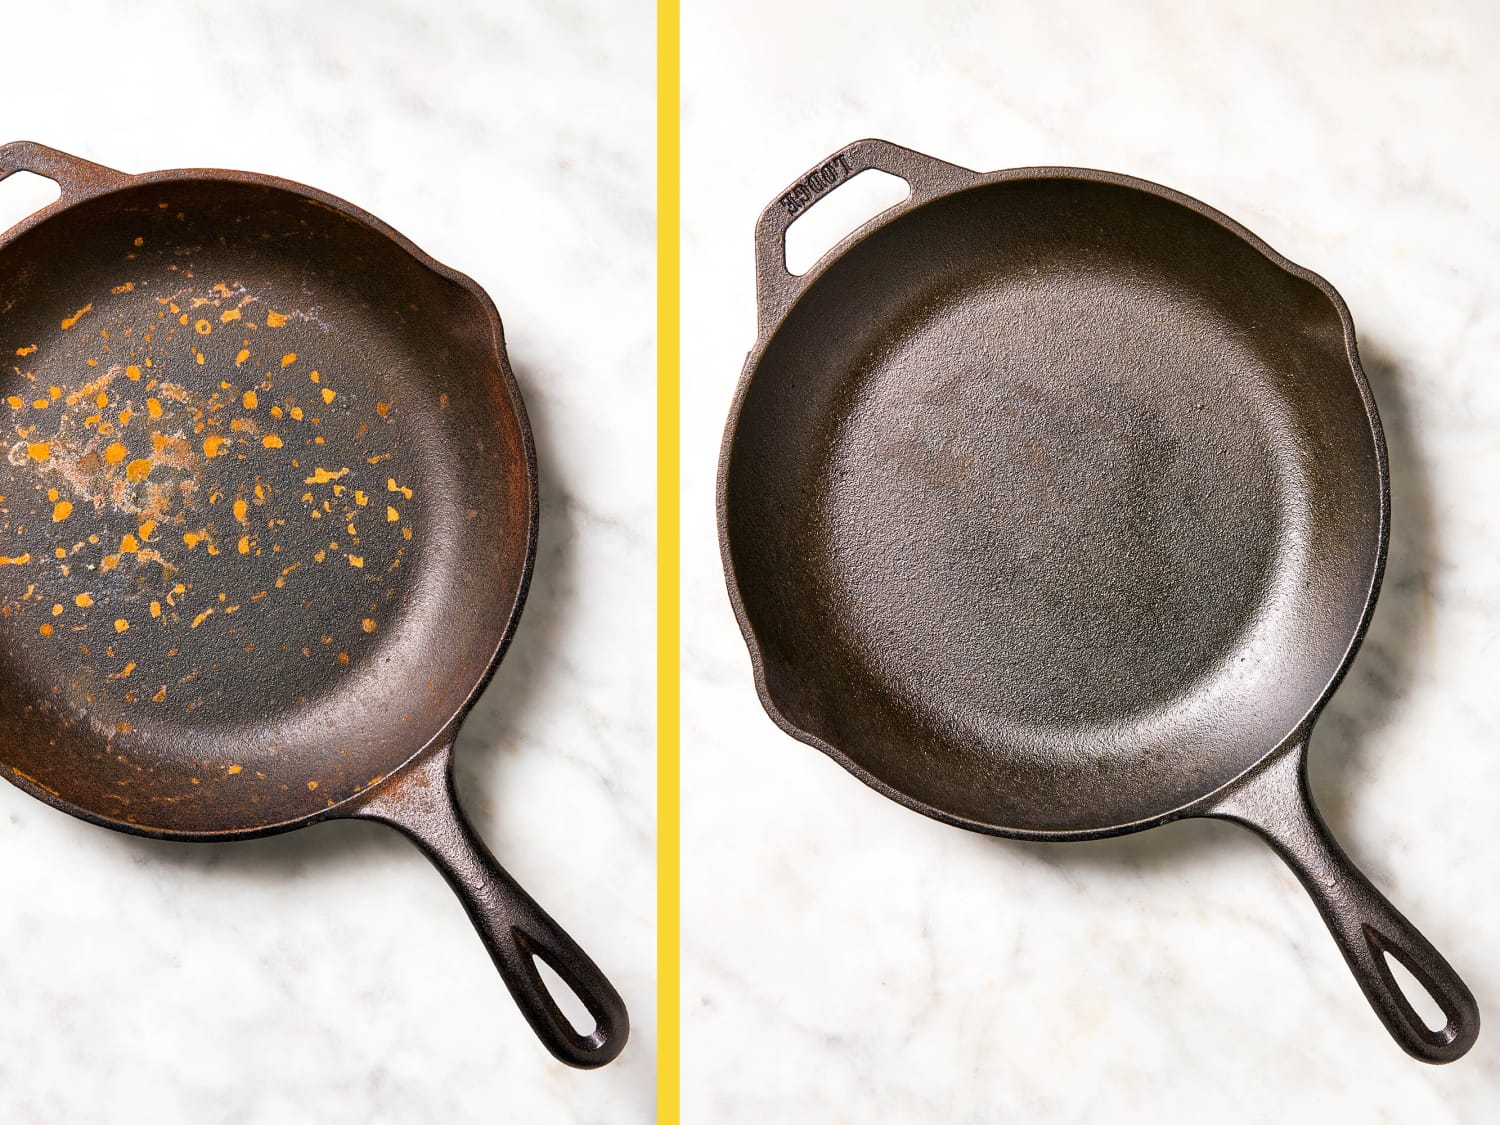 How to Clean a Cast-Iron Skillet, Pan, or Pot - Safe and Easy